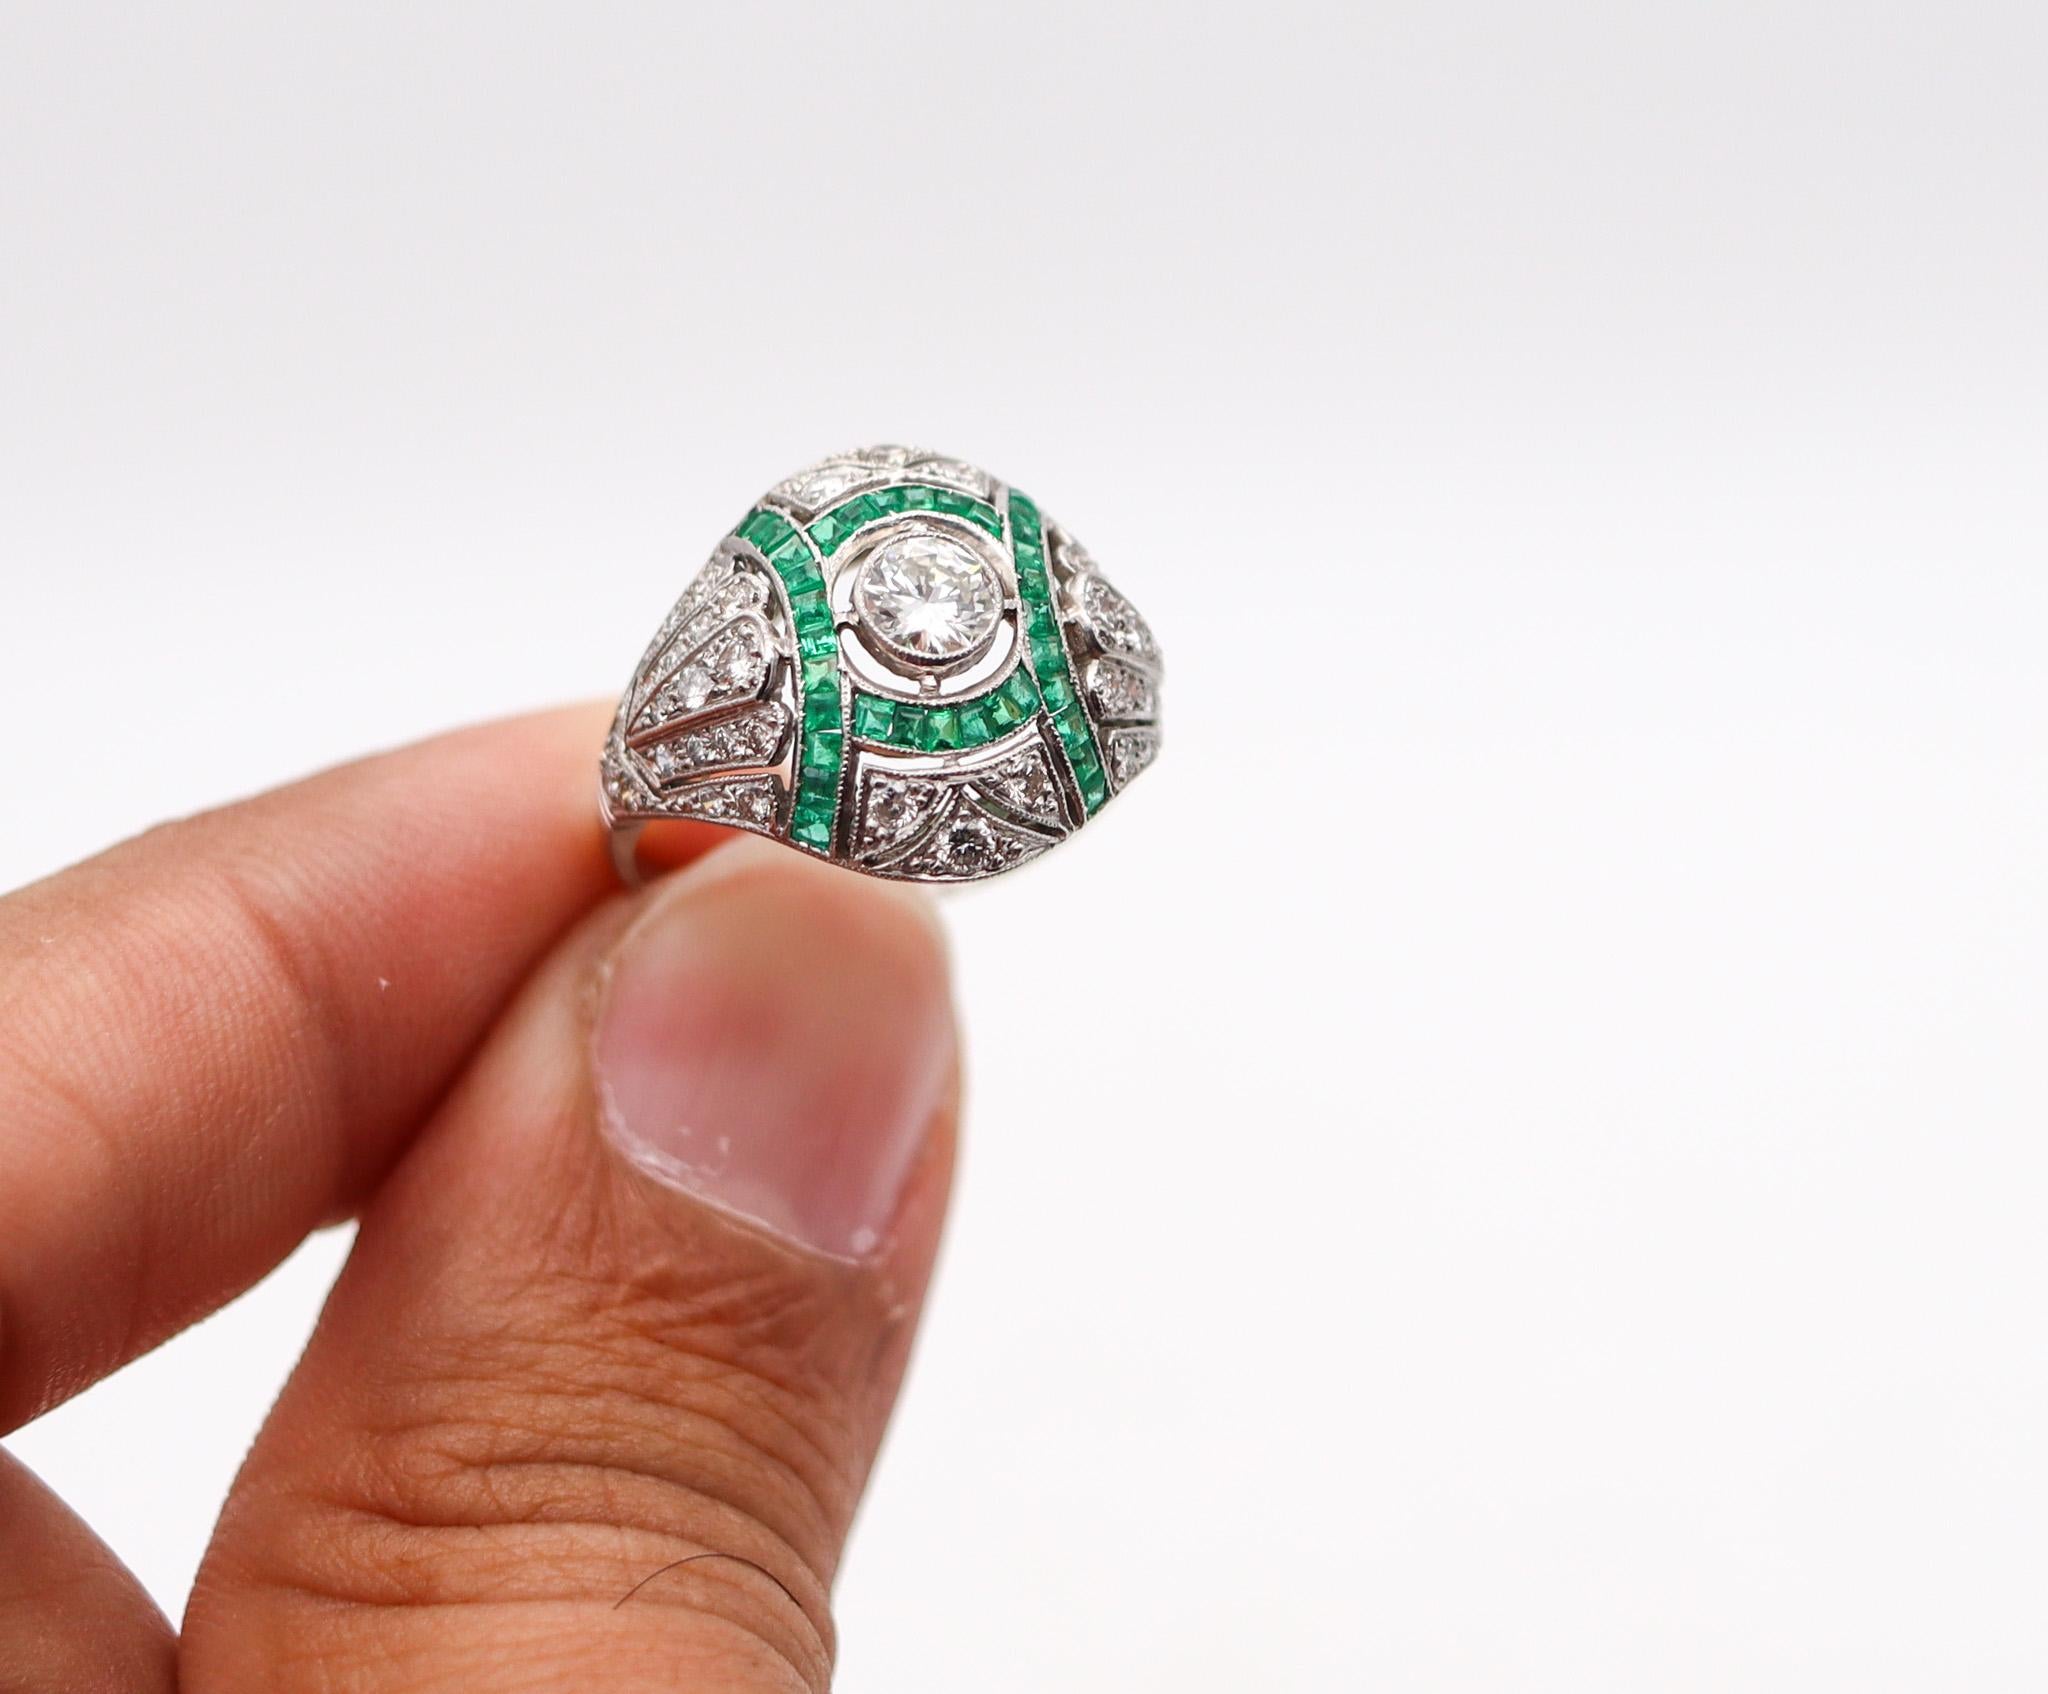 Women's Art Deco 1930 Cocktail Bombe Ring In Platinum With 3.19 Ctw Diamonds And Emerald For Sale